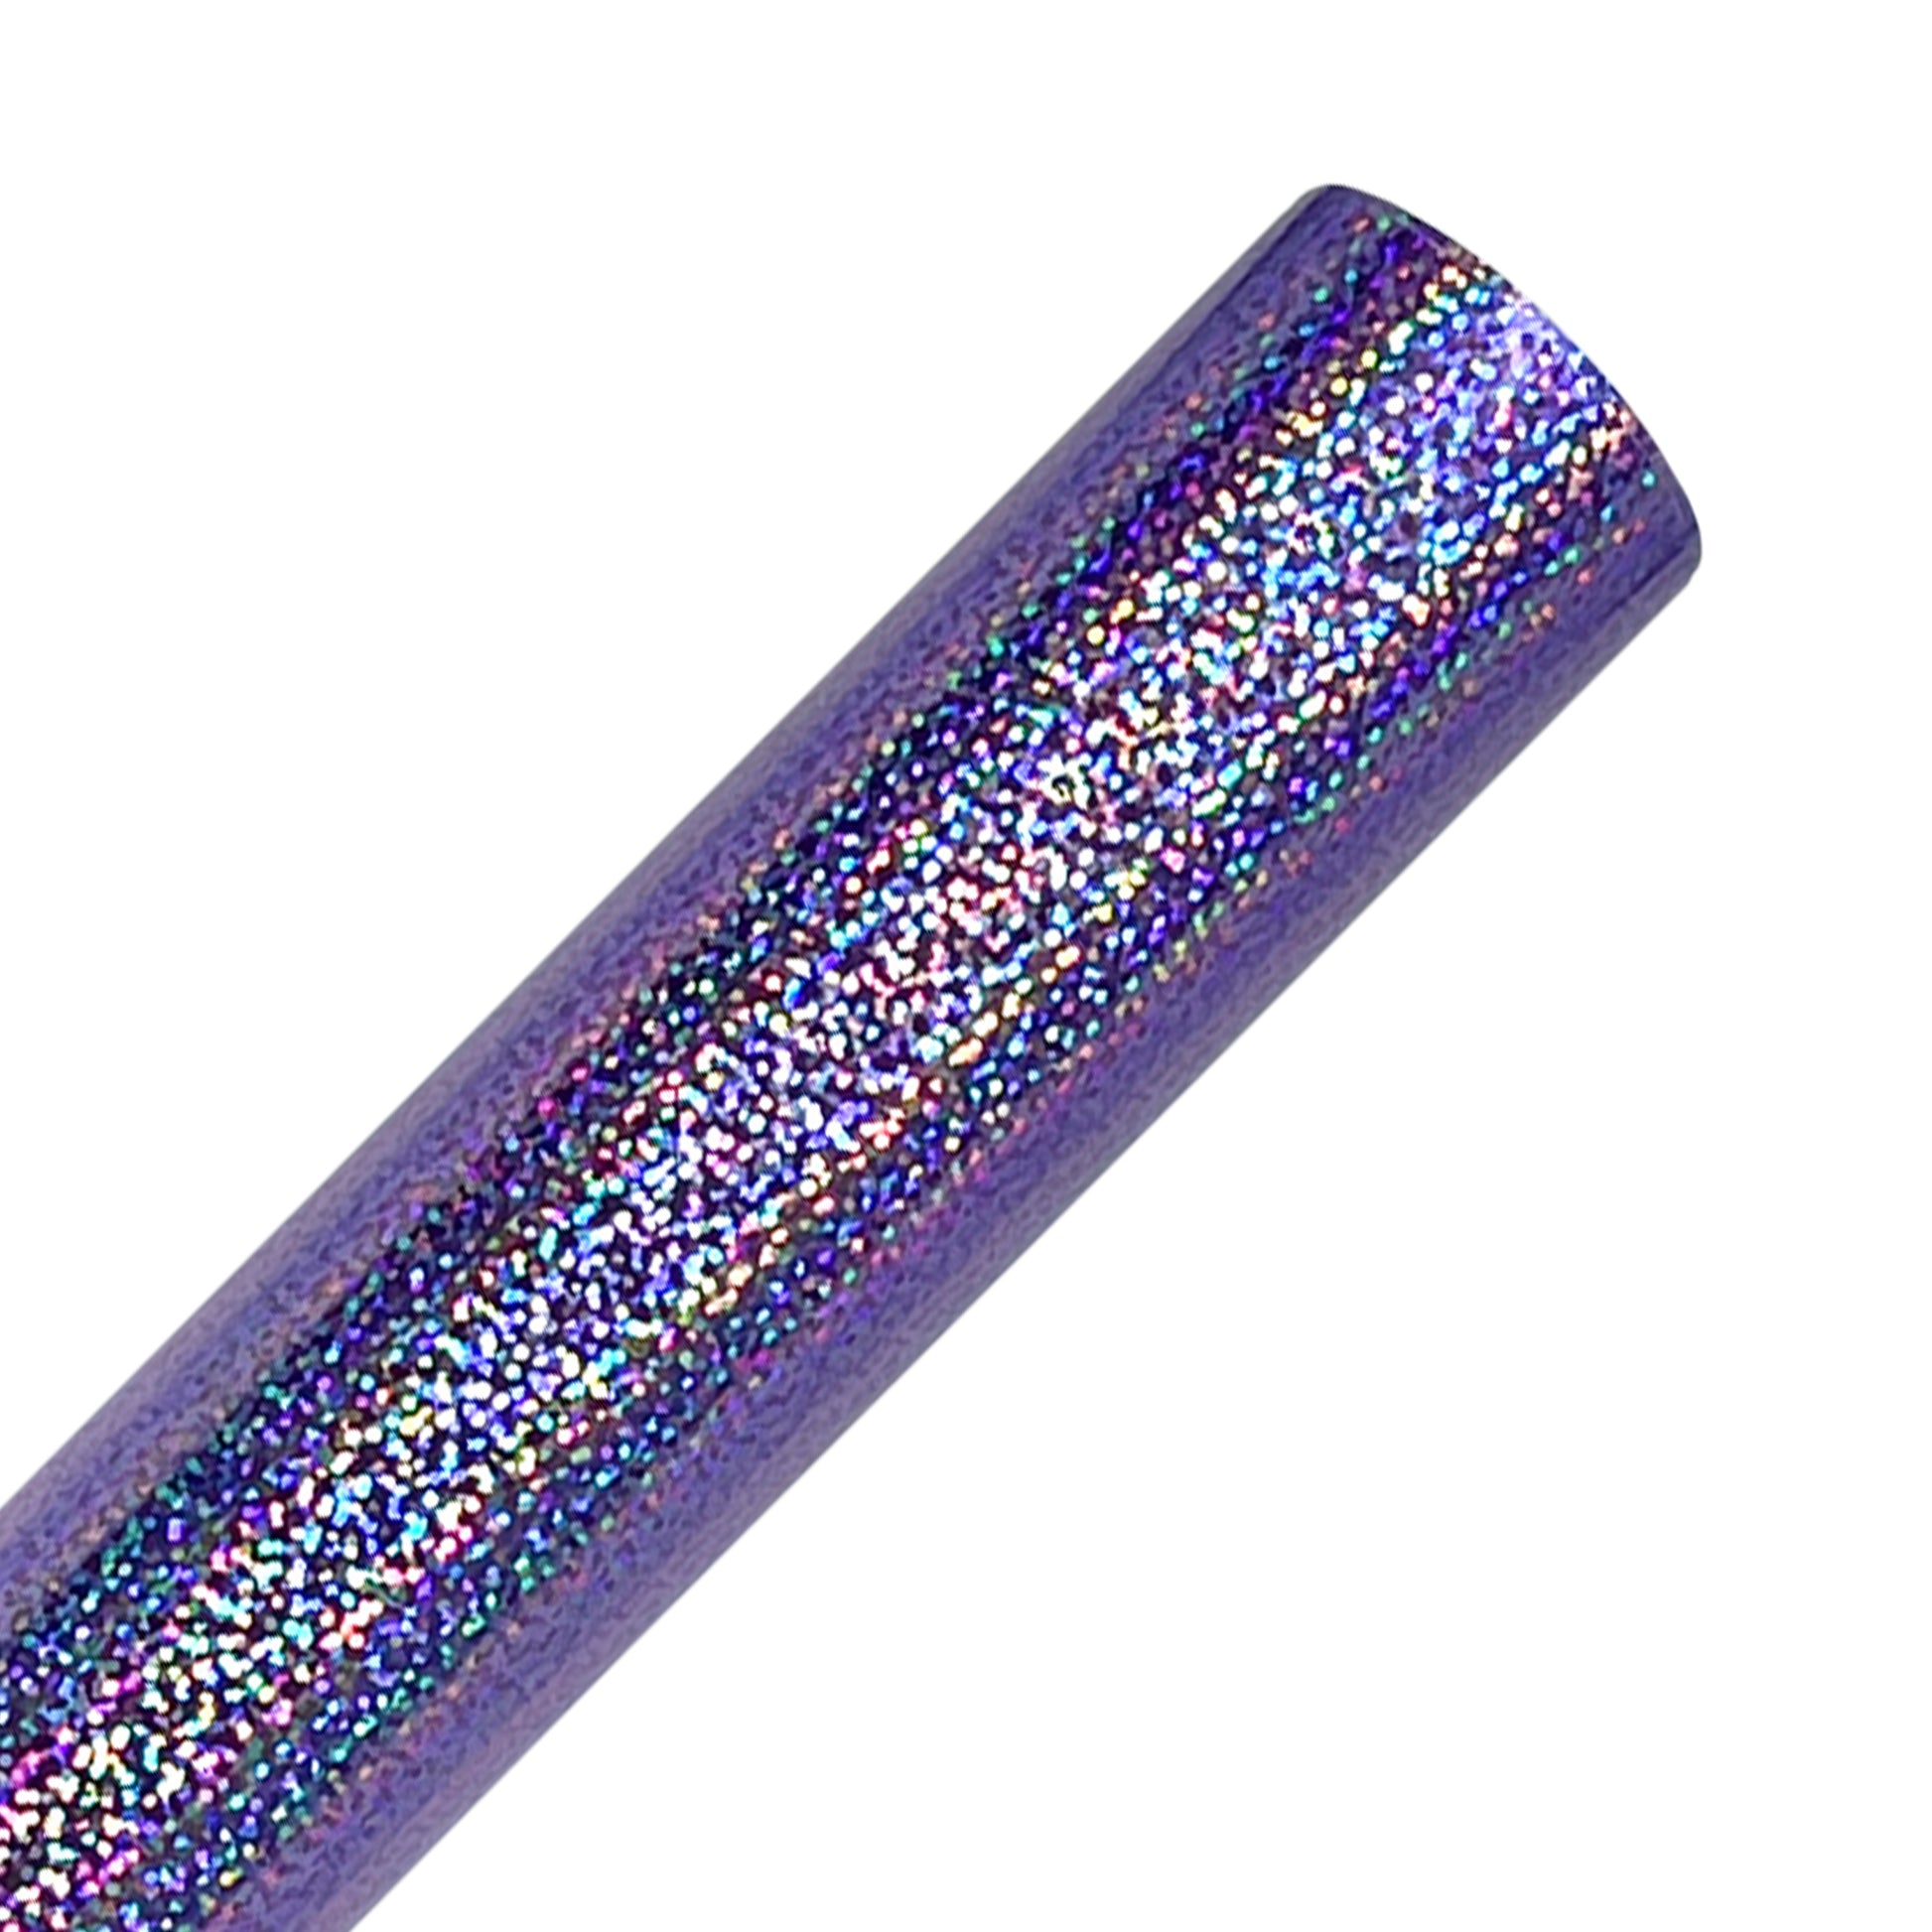 Red Holographic Sparkle Adhesive Vinyl Rolls By Craftables – shopcraftables